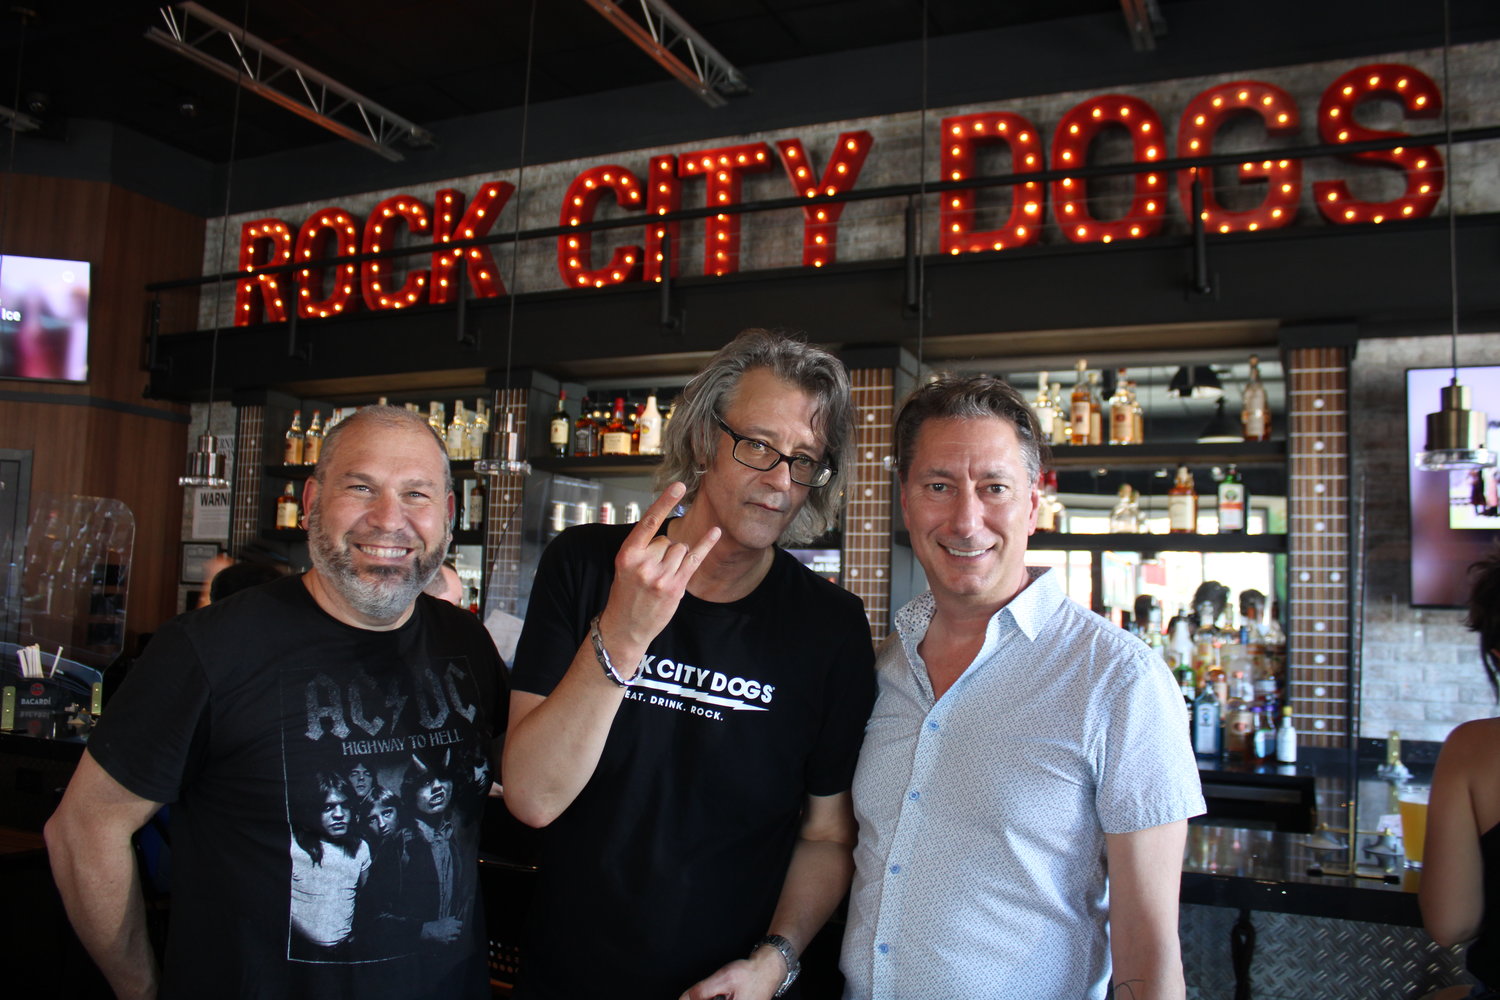 Rock City Dogs, a new music-themed eatery located at 3 E. Main Street in Bay Shore, is a joint venture of Tom McGiveron, Stevie Reno, Stephen Bennett and Vina Vollmer (not pictured). Read the restaurant review on page 9.